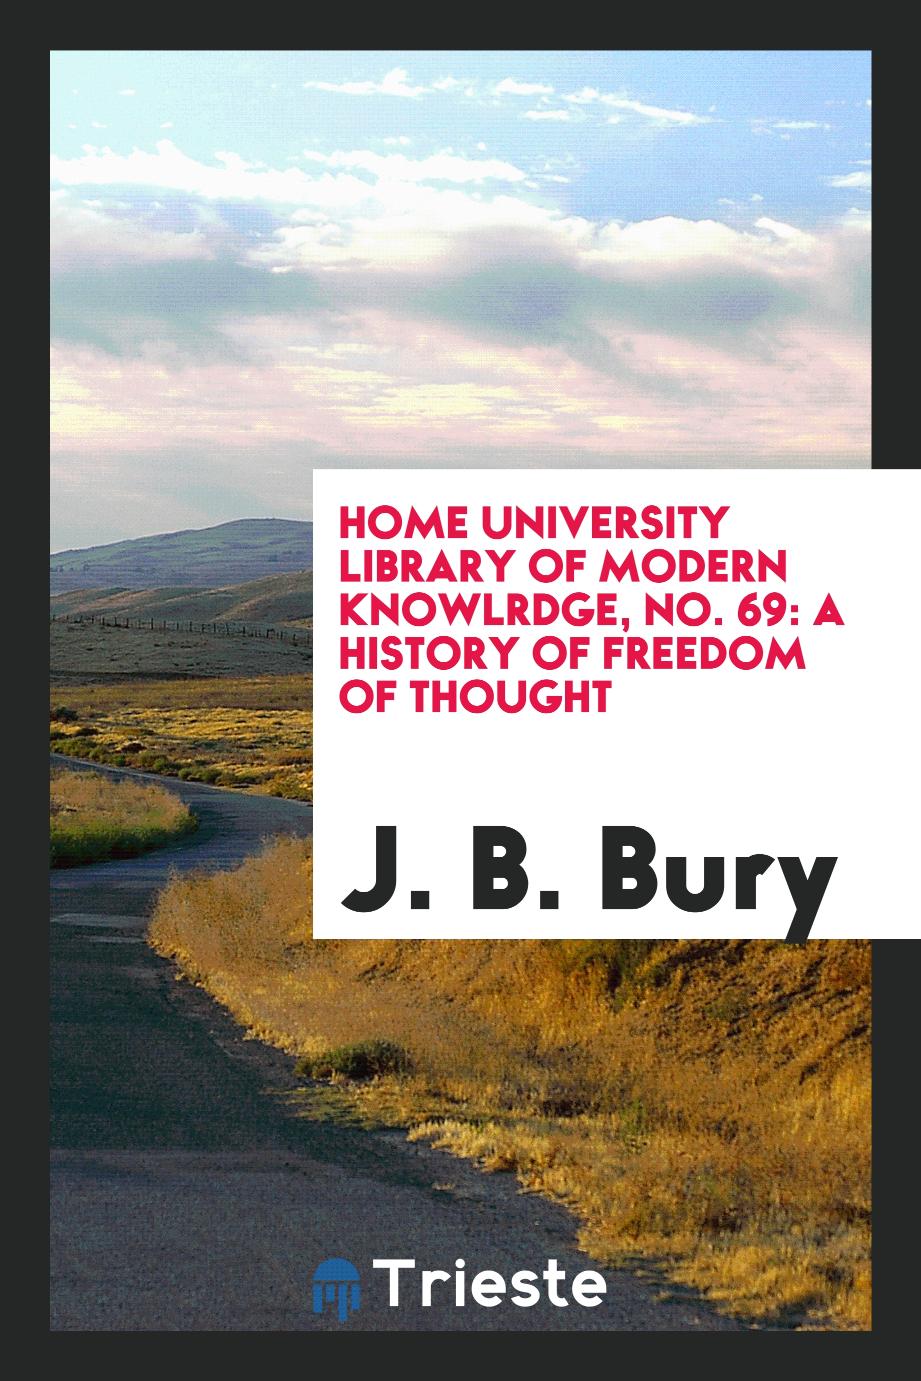 Home University library of modern knowlrdge, No. 69: A history of freedom of thought